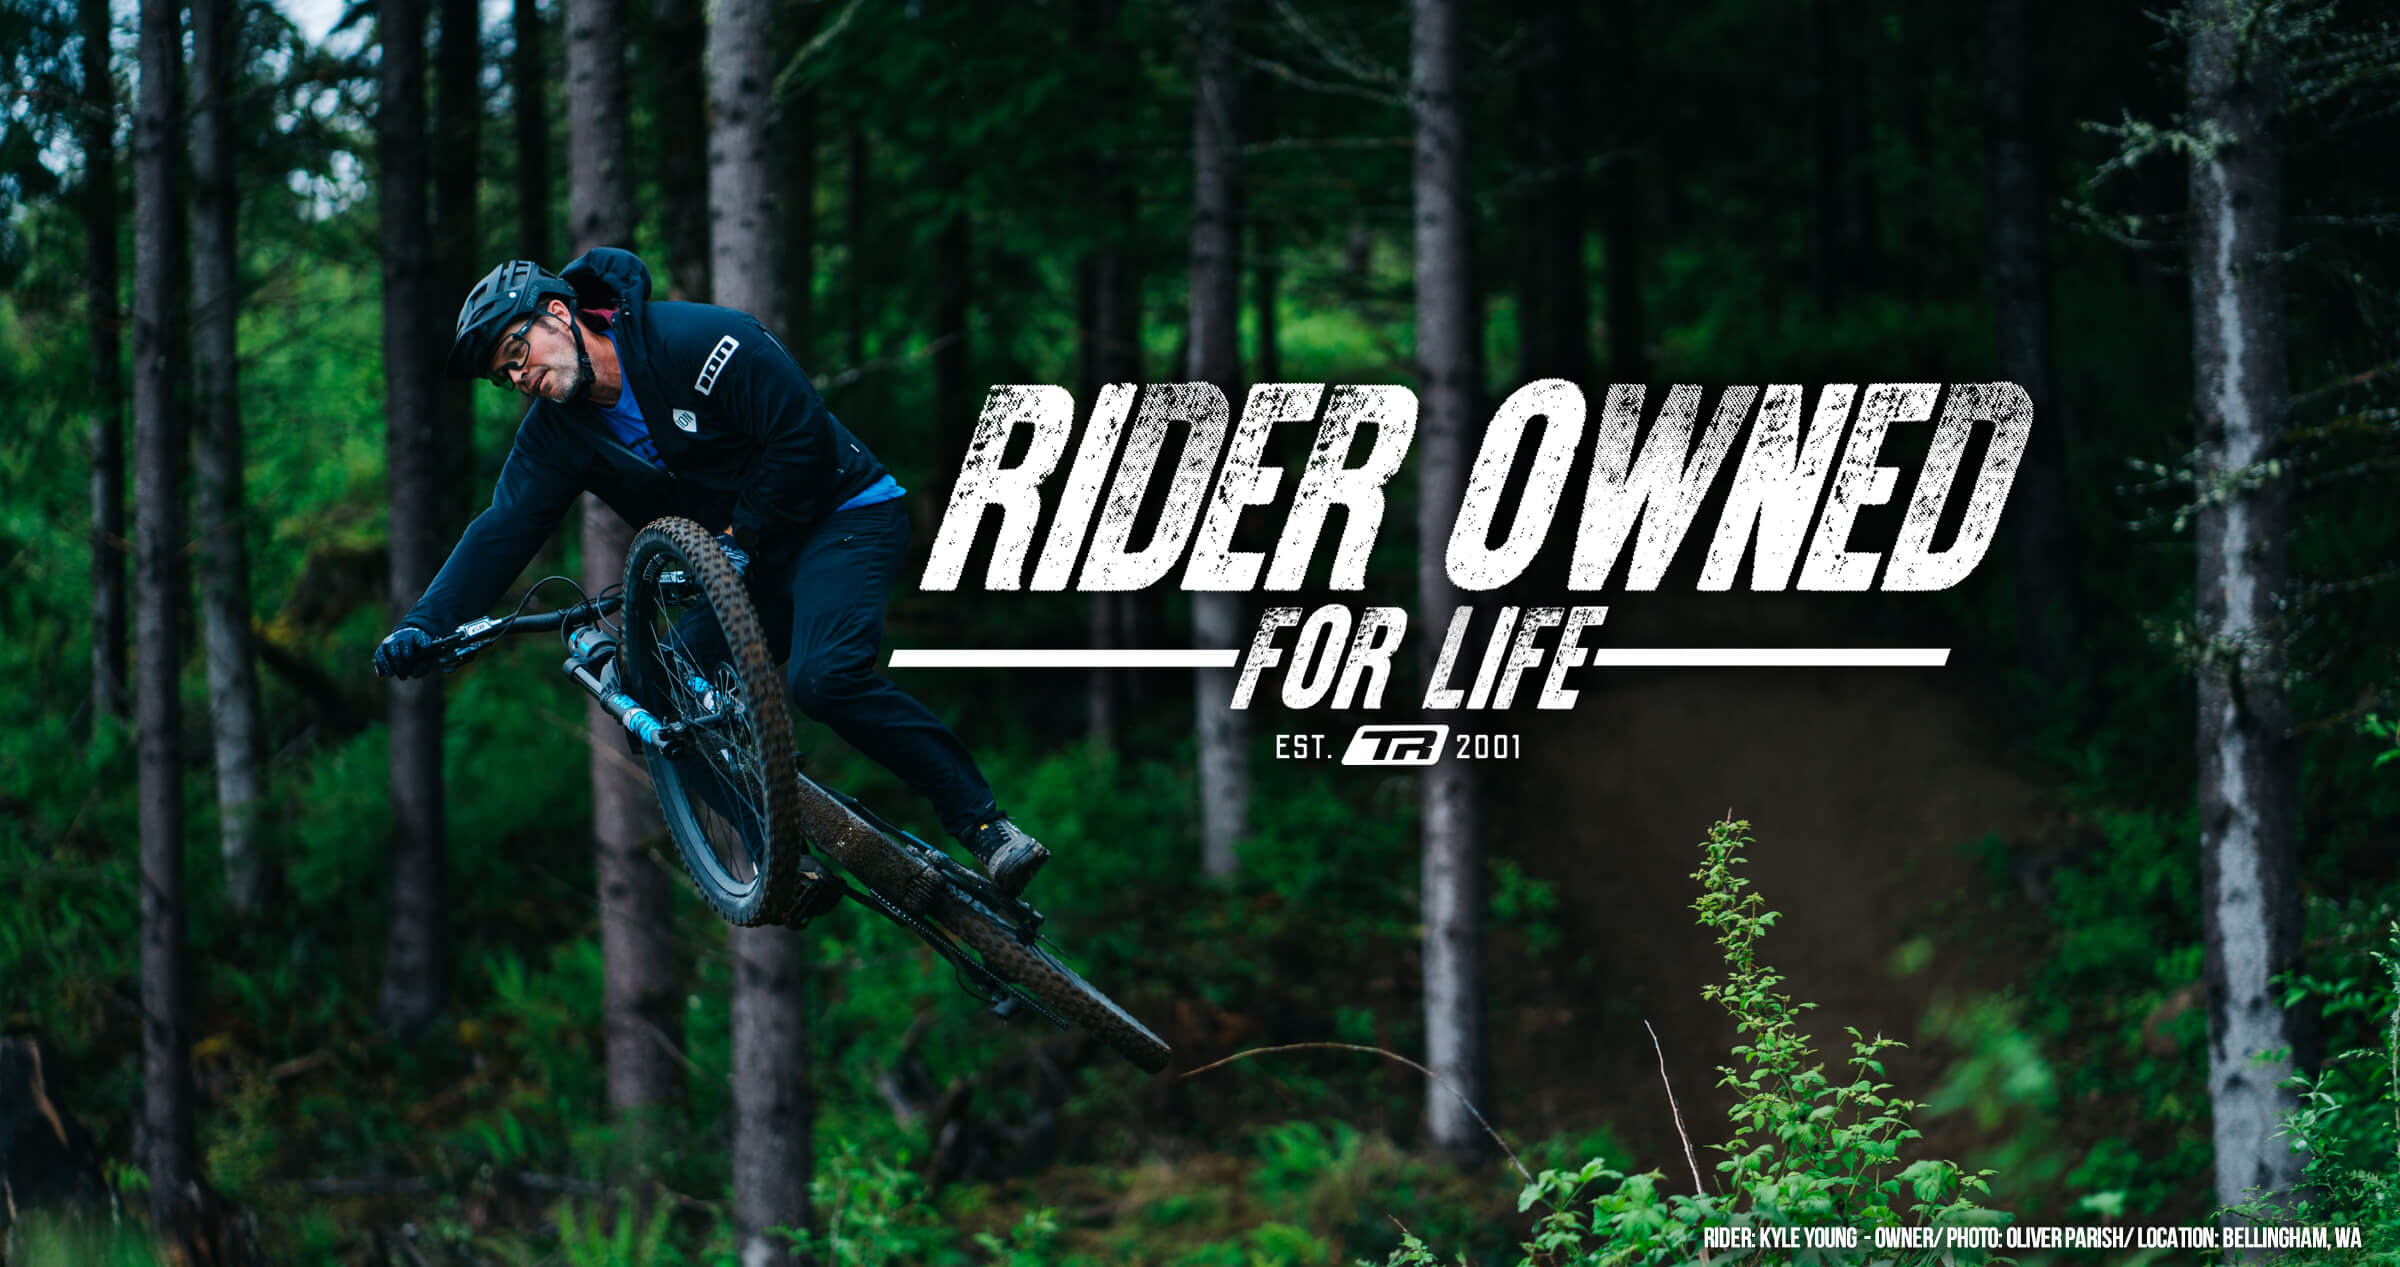 Rider Owned For Life